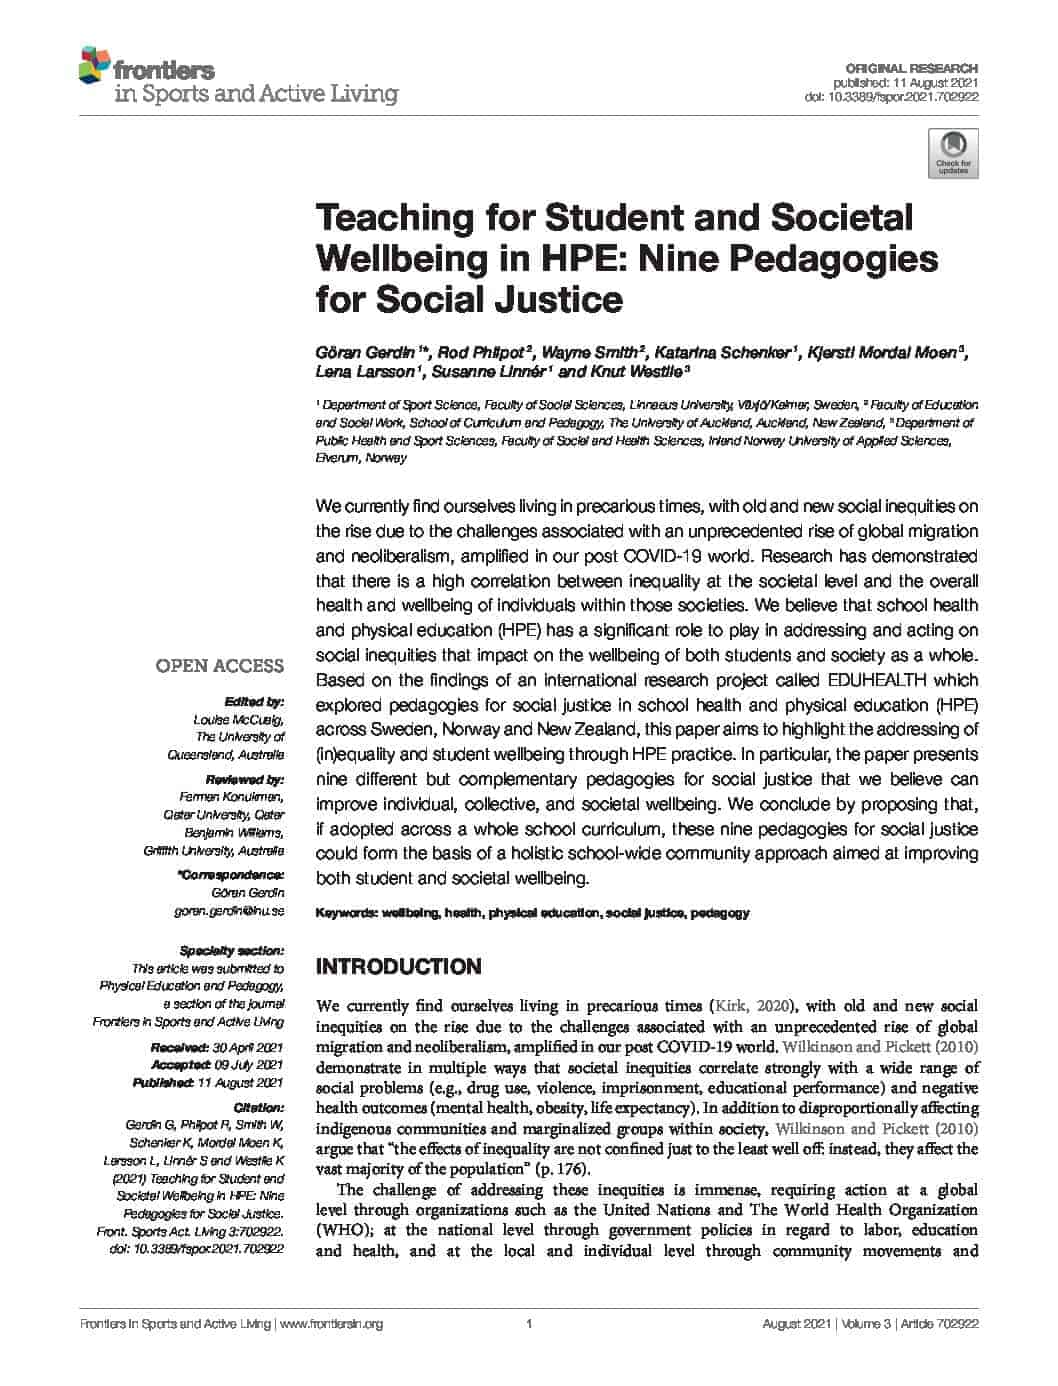 Teaching for Student and Societal Wellbeing in HPE: Nine Pedagogies for Social Justice